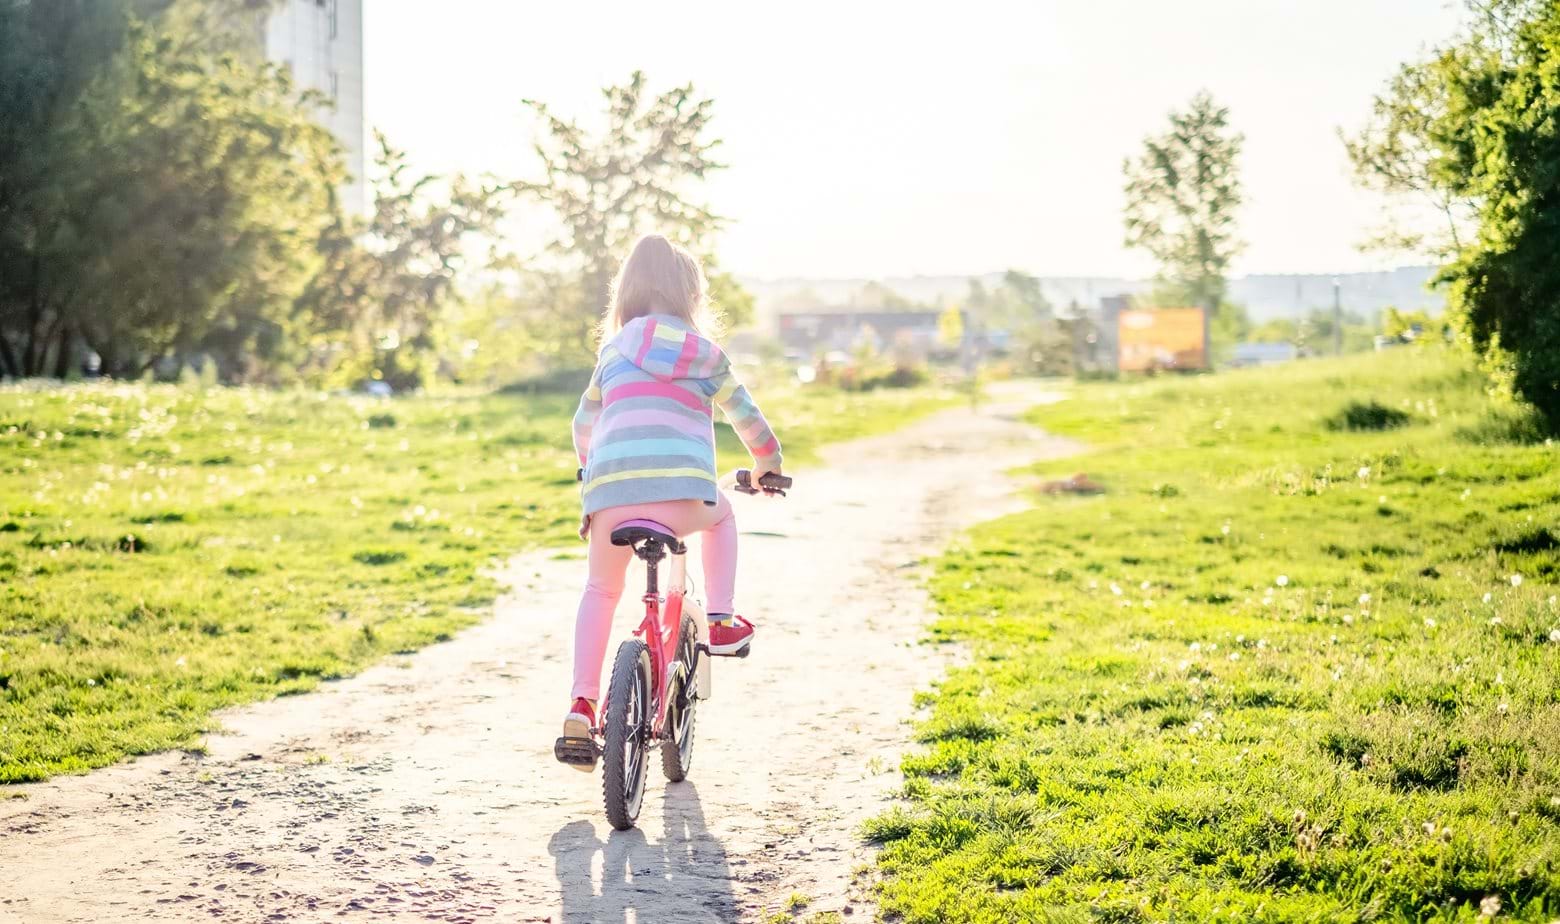 Walk and ride through parks close to your new Peabody home